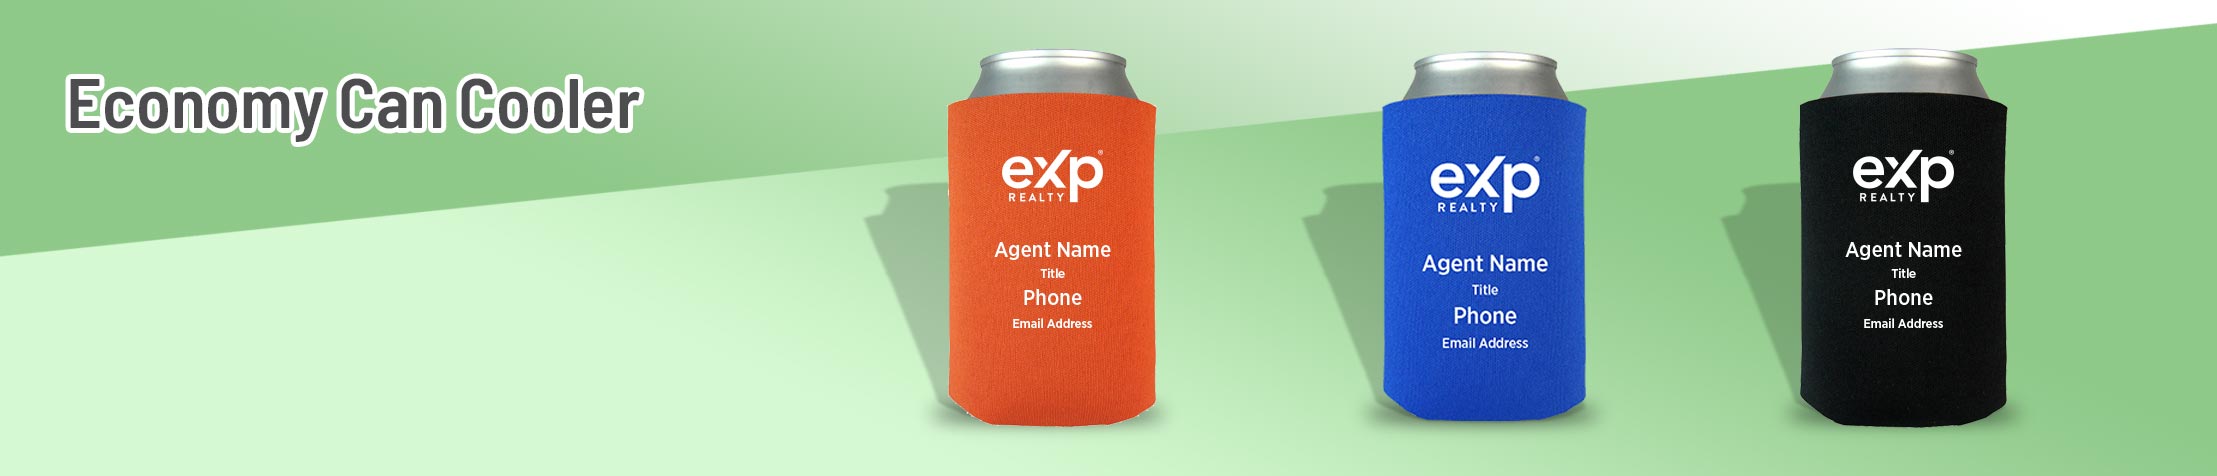 eXp Realty Real Estate Economy Can Cooler -  personalized realtor promotional products | Sparkprint.com